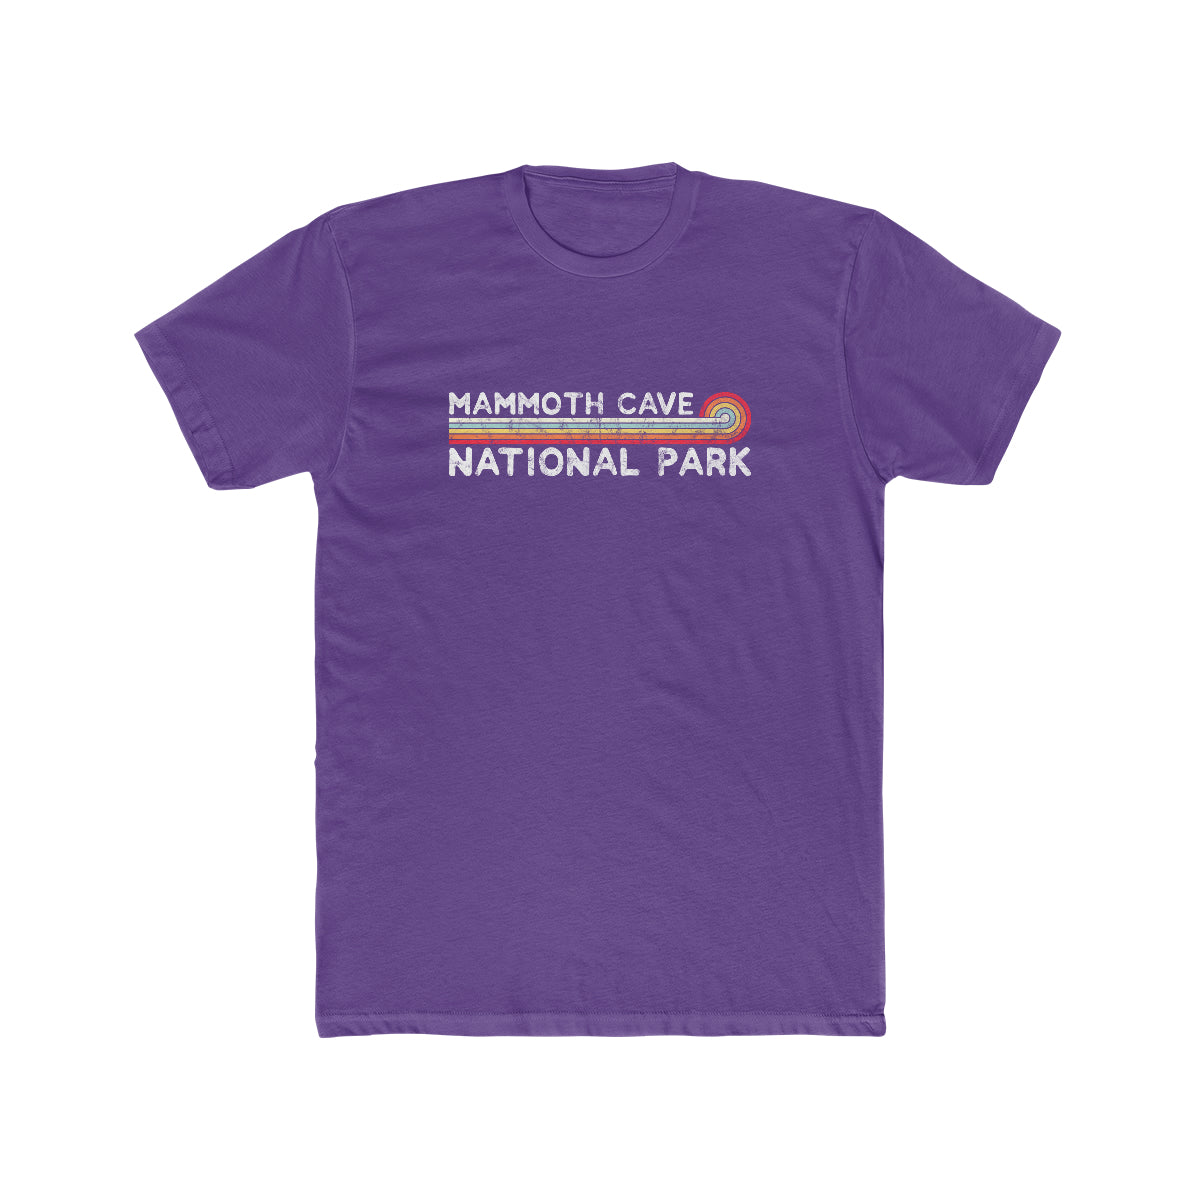 Mammoth Cave National Park T-Shirt - Vintage Stretched Sunrise